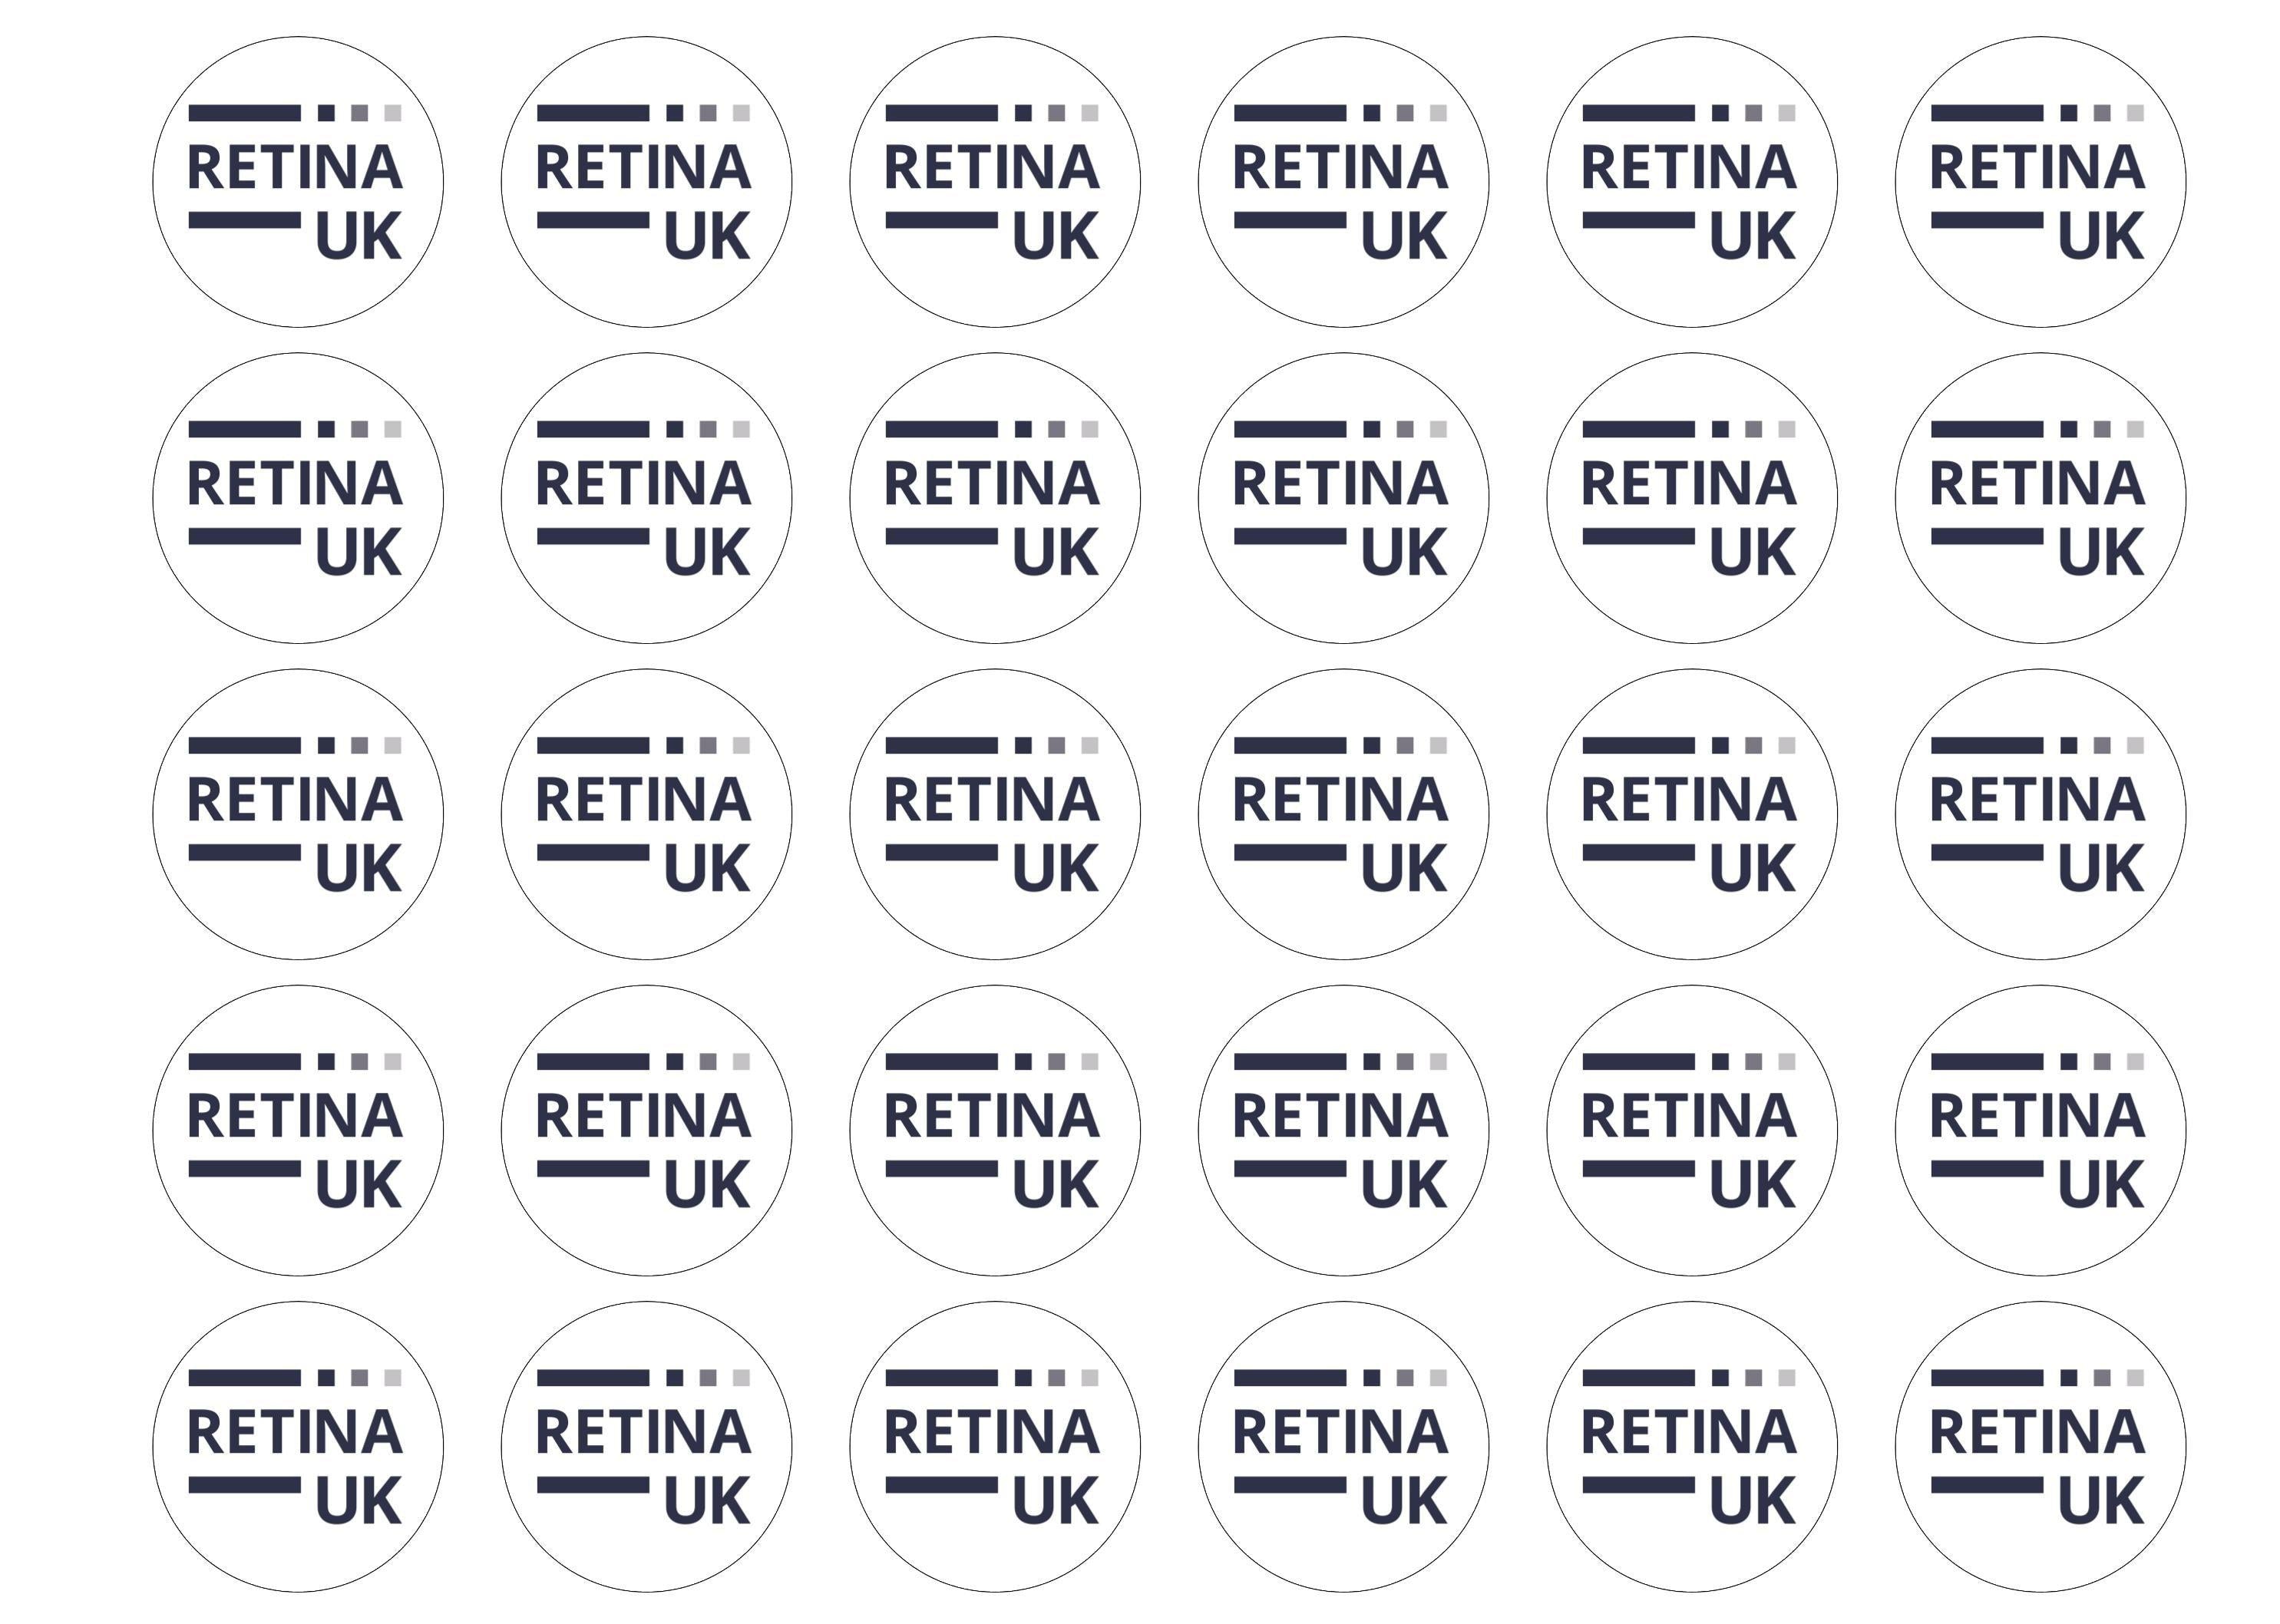 30 edible toppers with the Retina UK logo